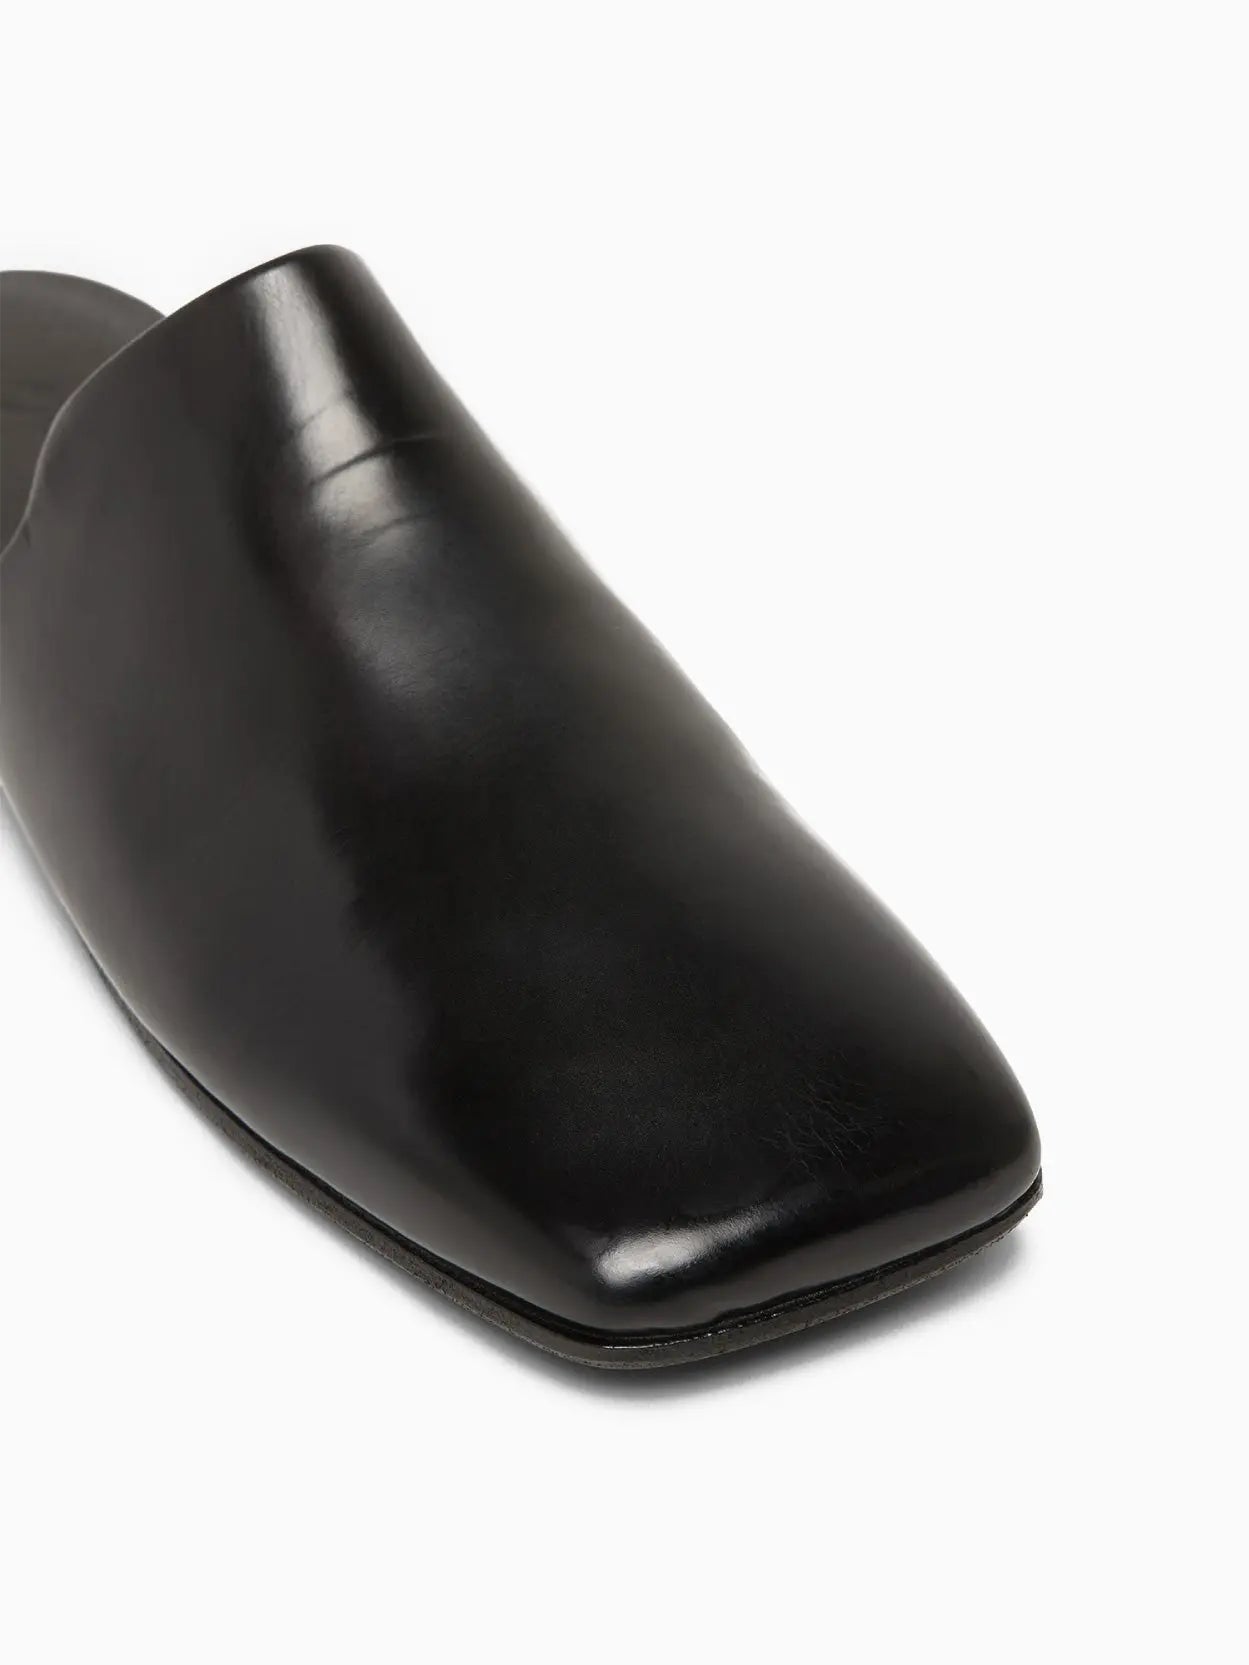 A sleek black leather mule slipper with a flat sole, open back, and round toe design on a white background. Available at Bassalstore in Barcelona, the Spatolona Mule Black by Marsèll features a smooth, polished finish and a low-profile silhouette.